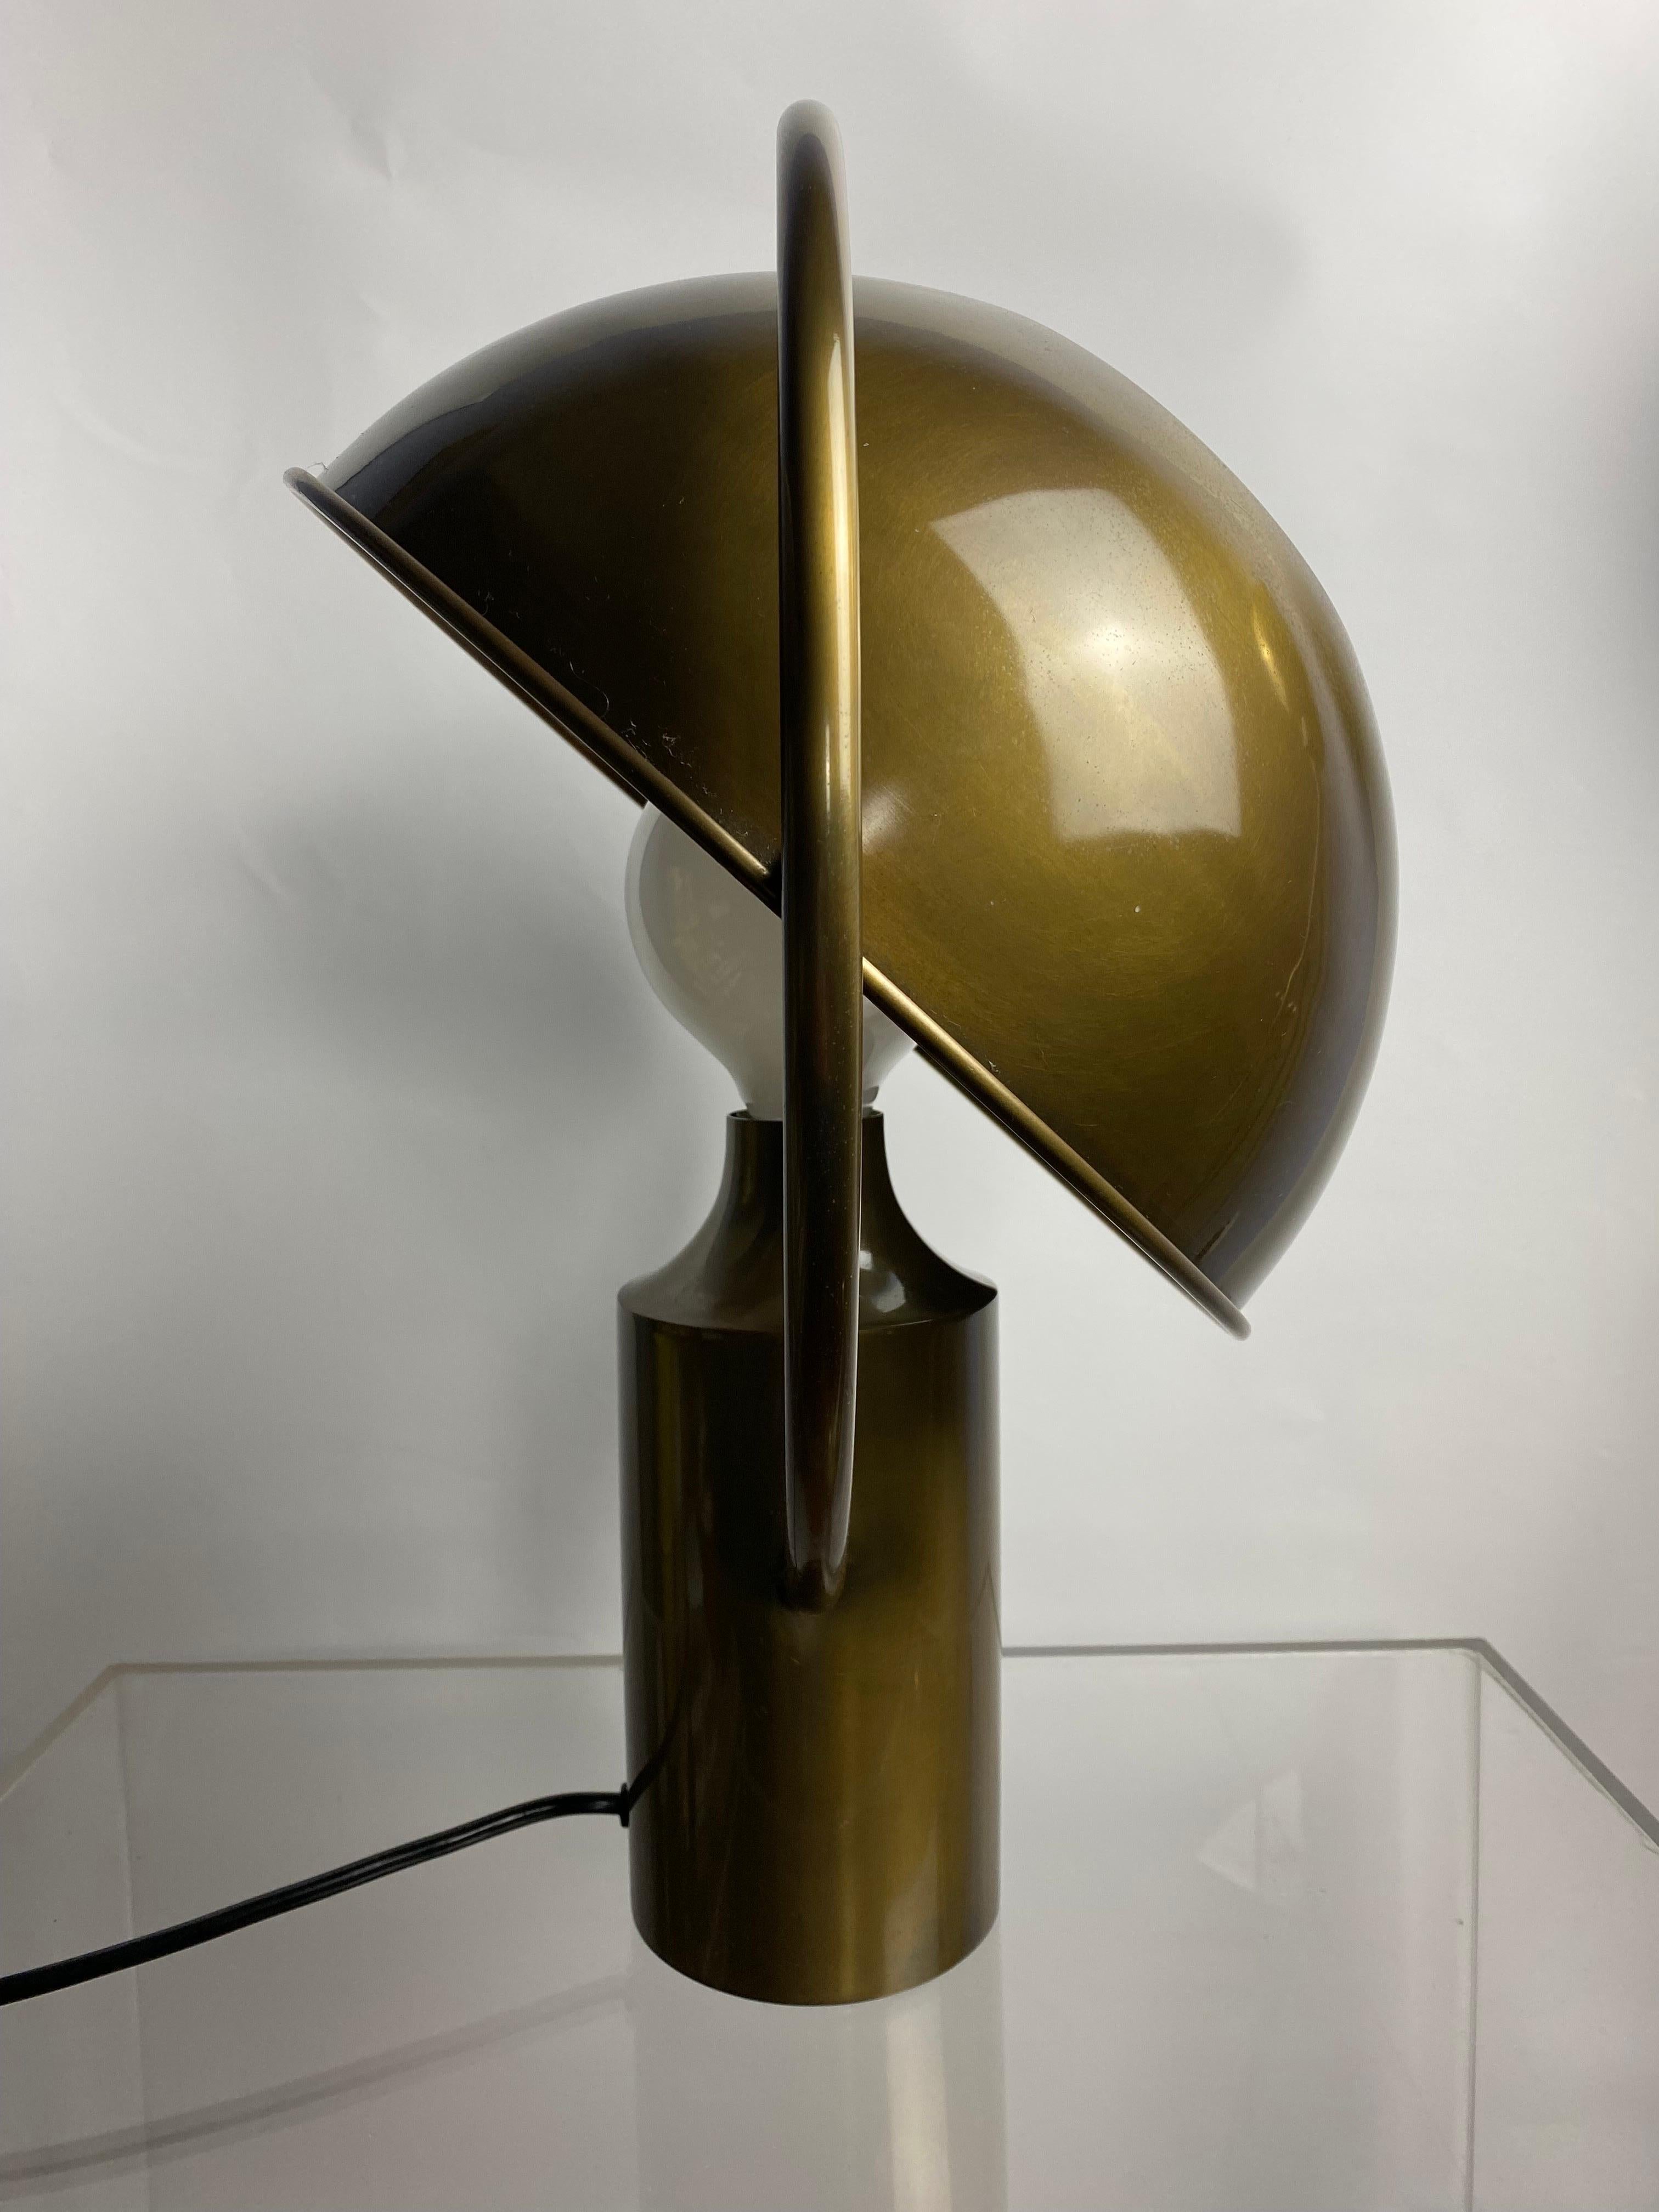 Rare German Midcentury Table Lamp in Solid Brass by Günter&Florian Schulz 1970s In Good Condition For Sale In Halle, DE